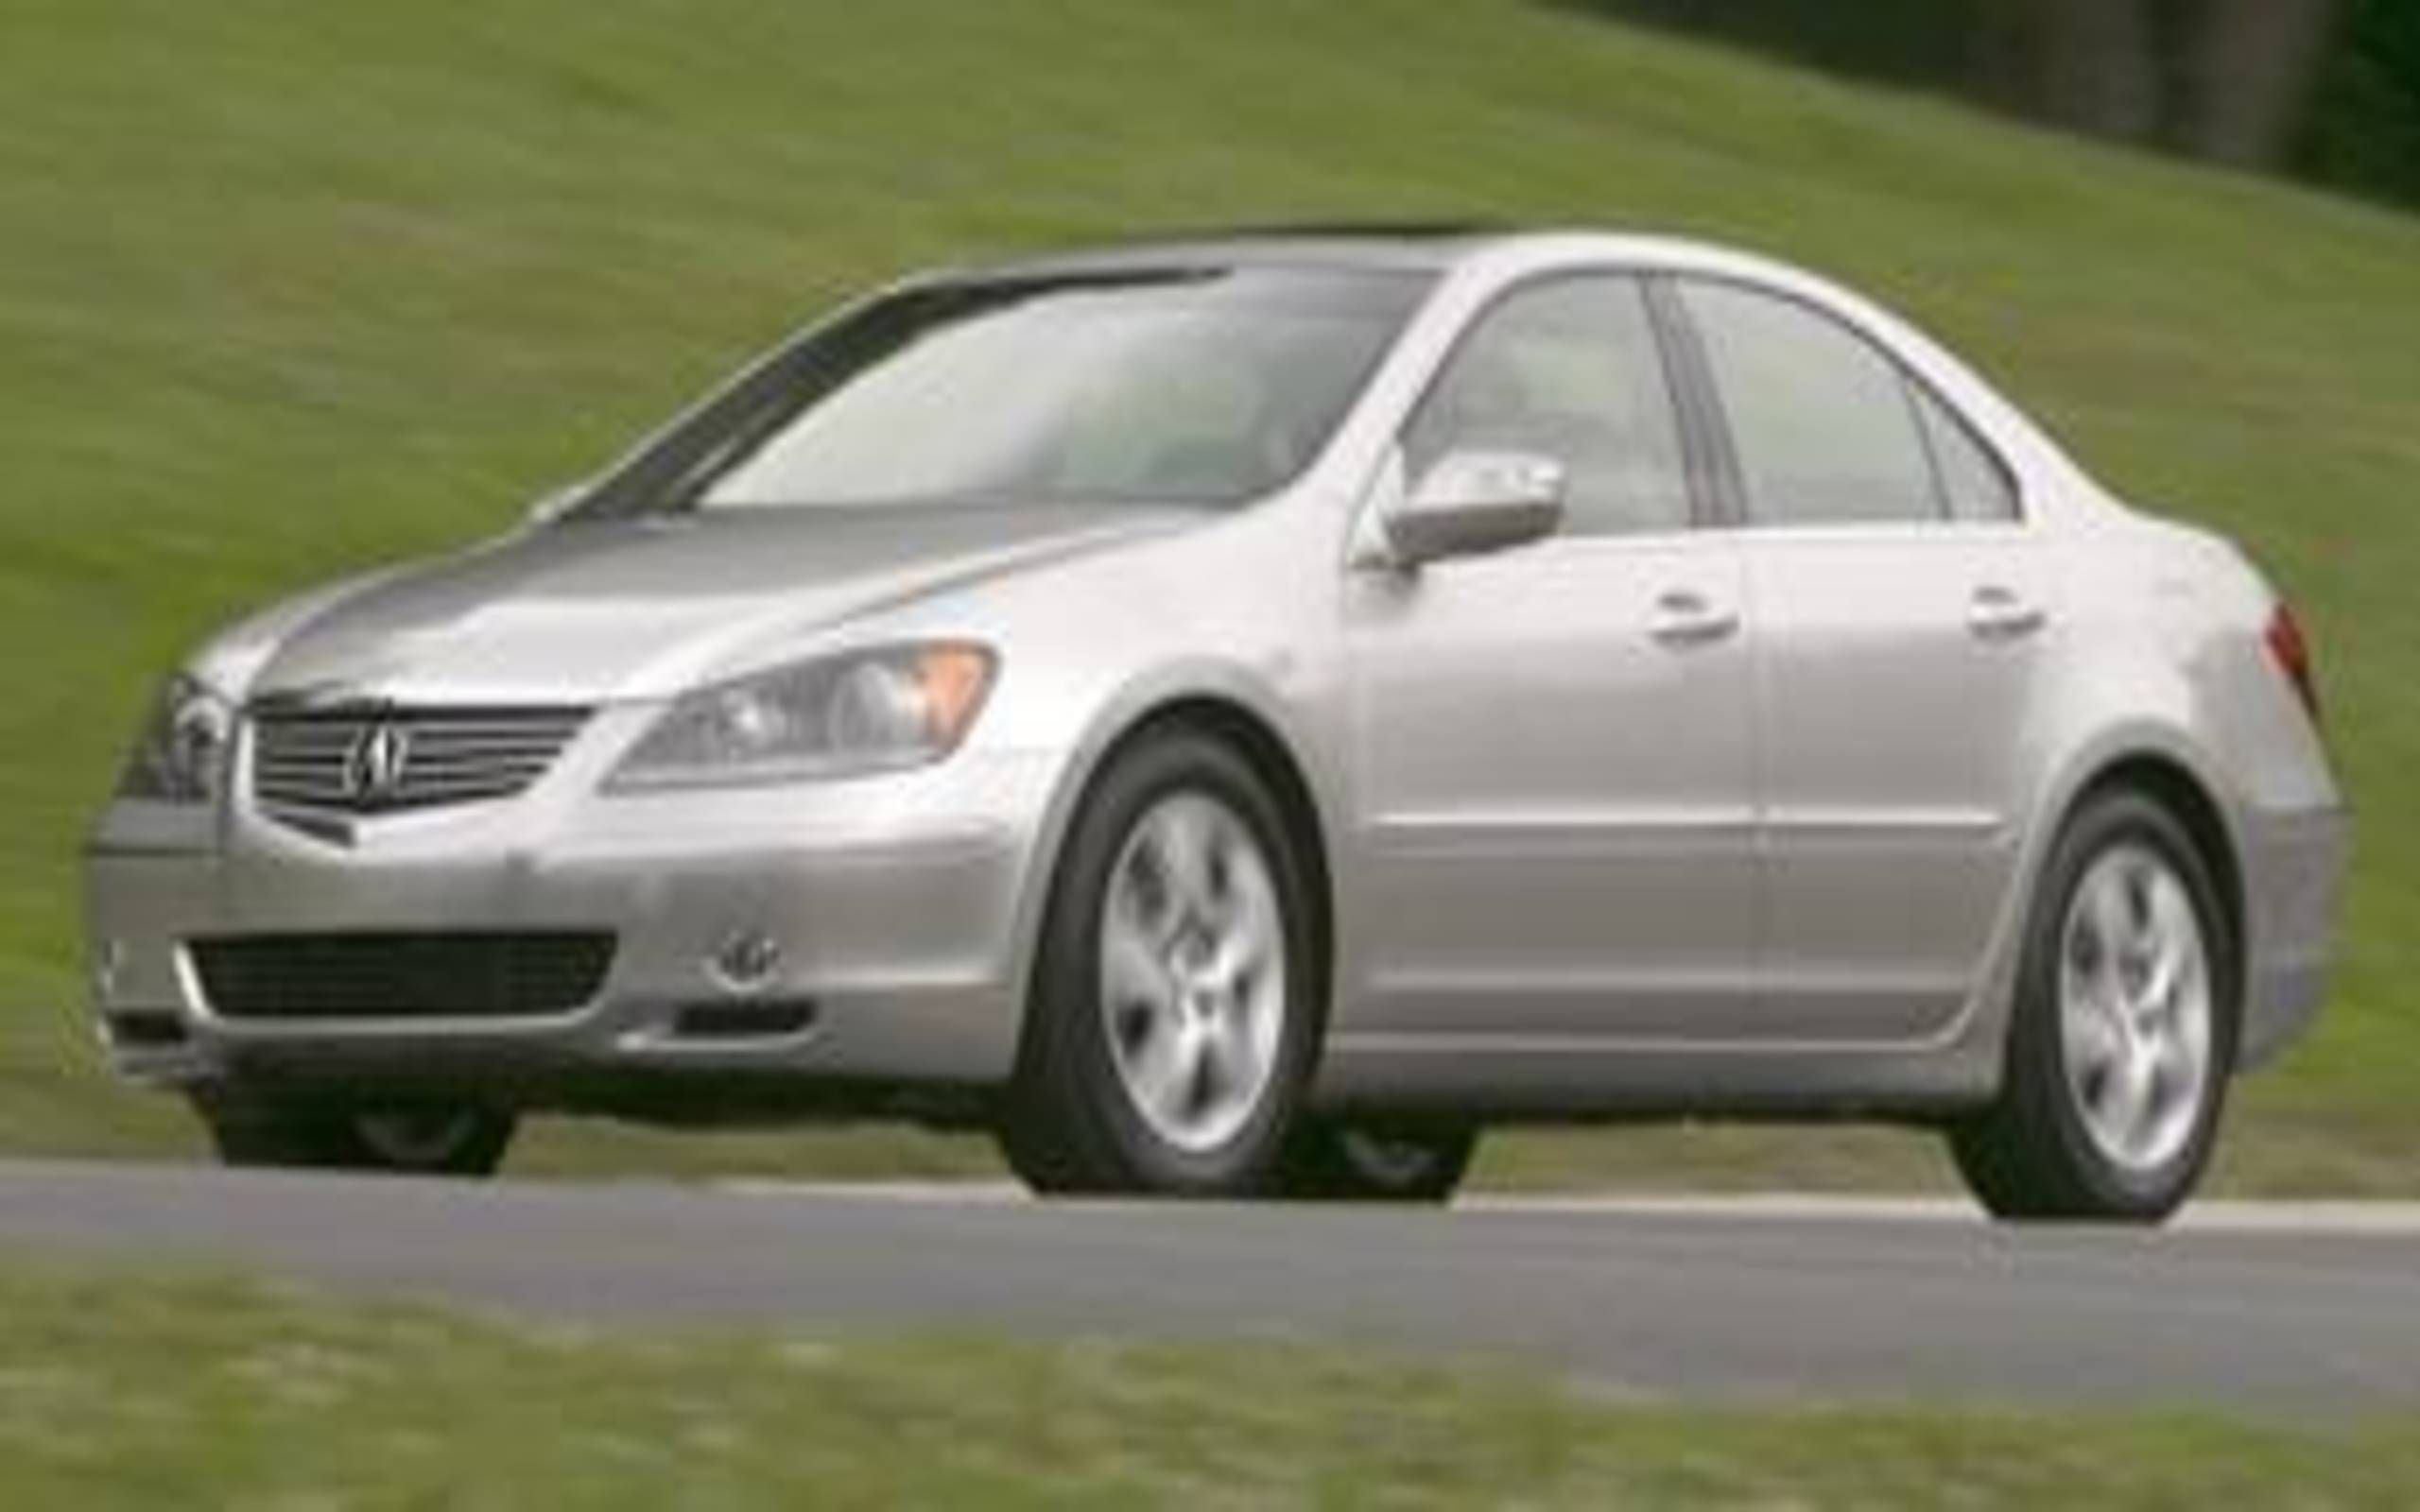 2005 Acura Rl Acura Has Found Its Way Back To The Big Game With The New Rl